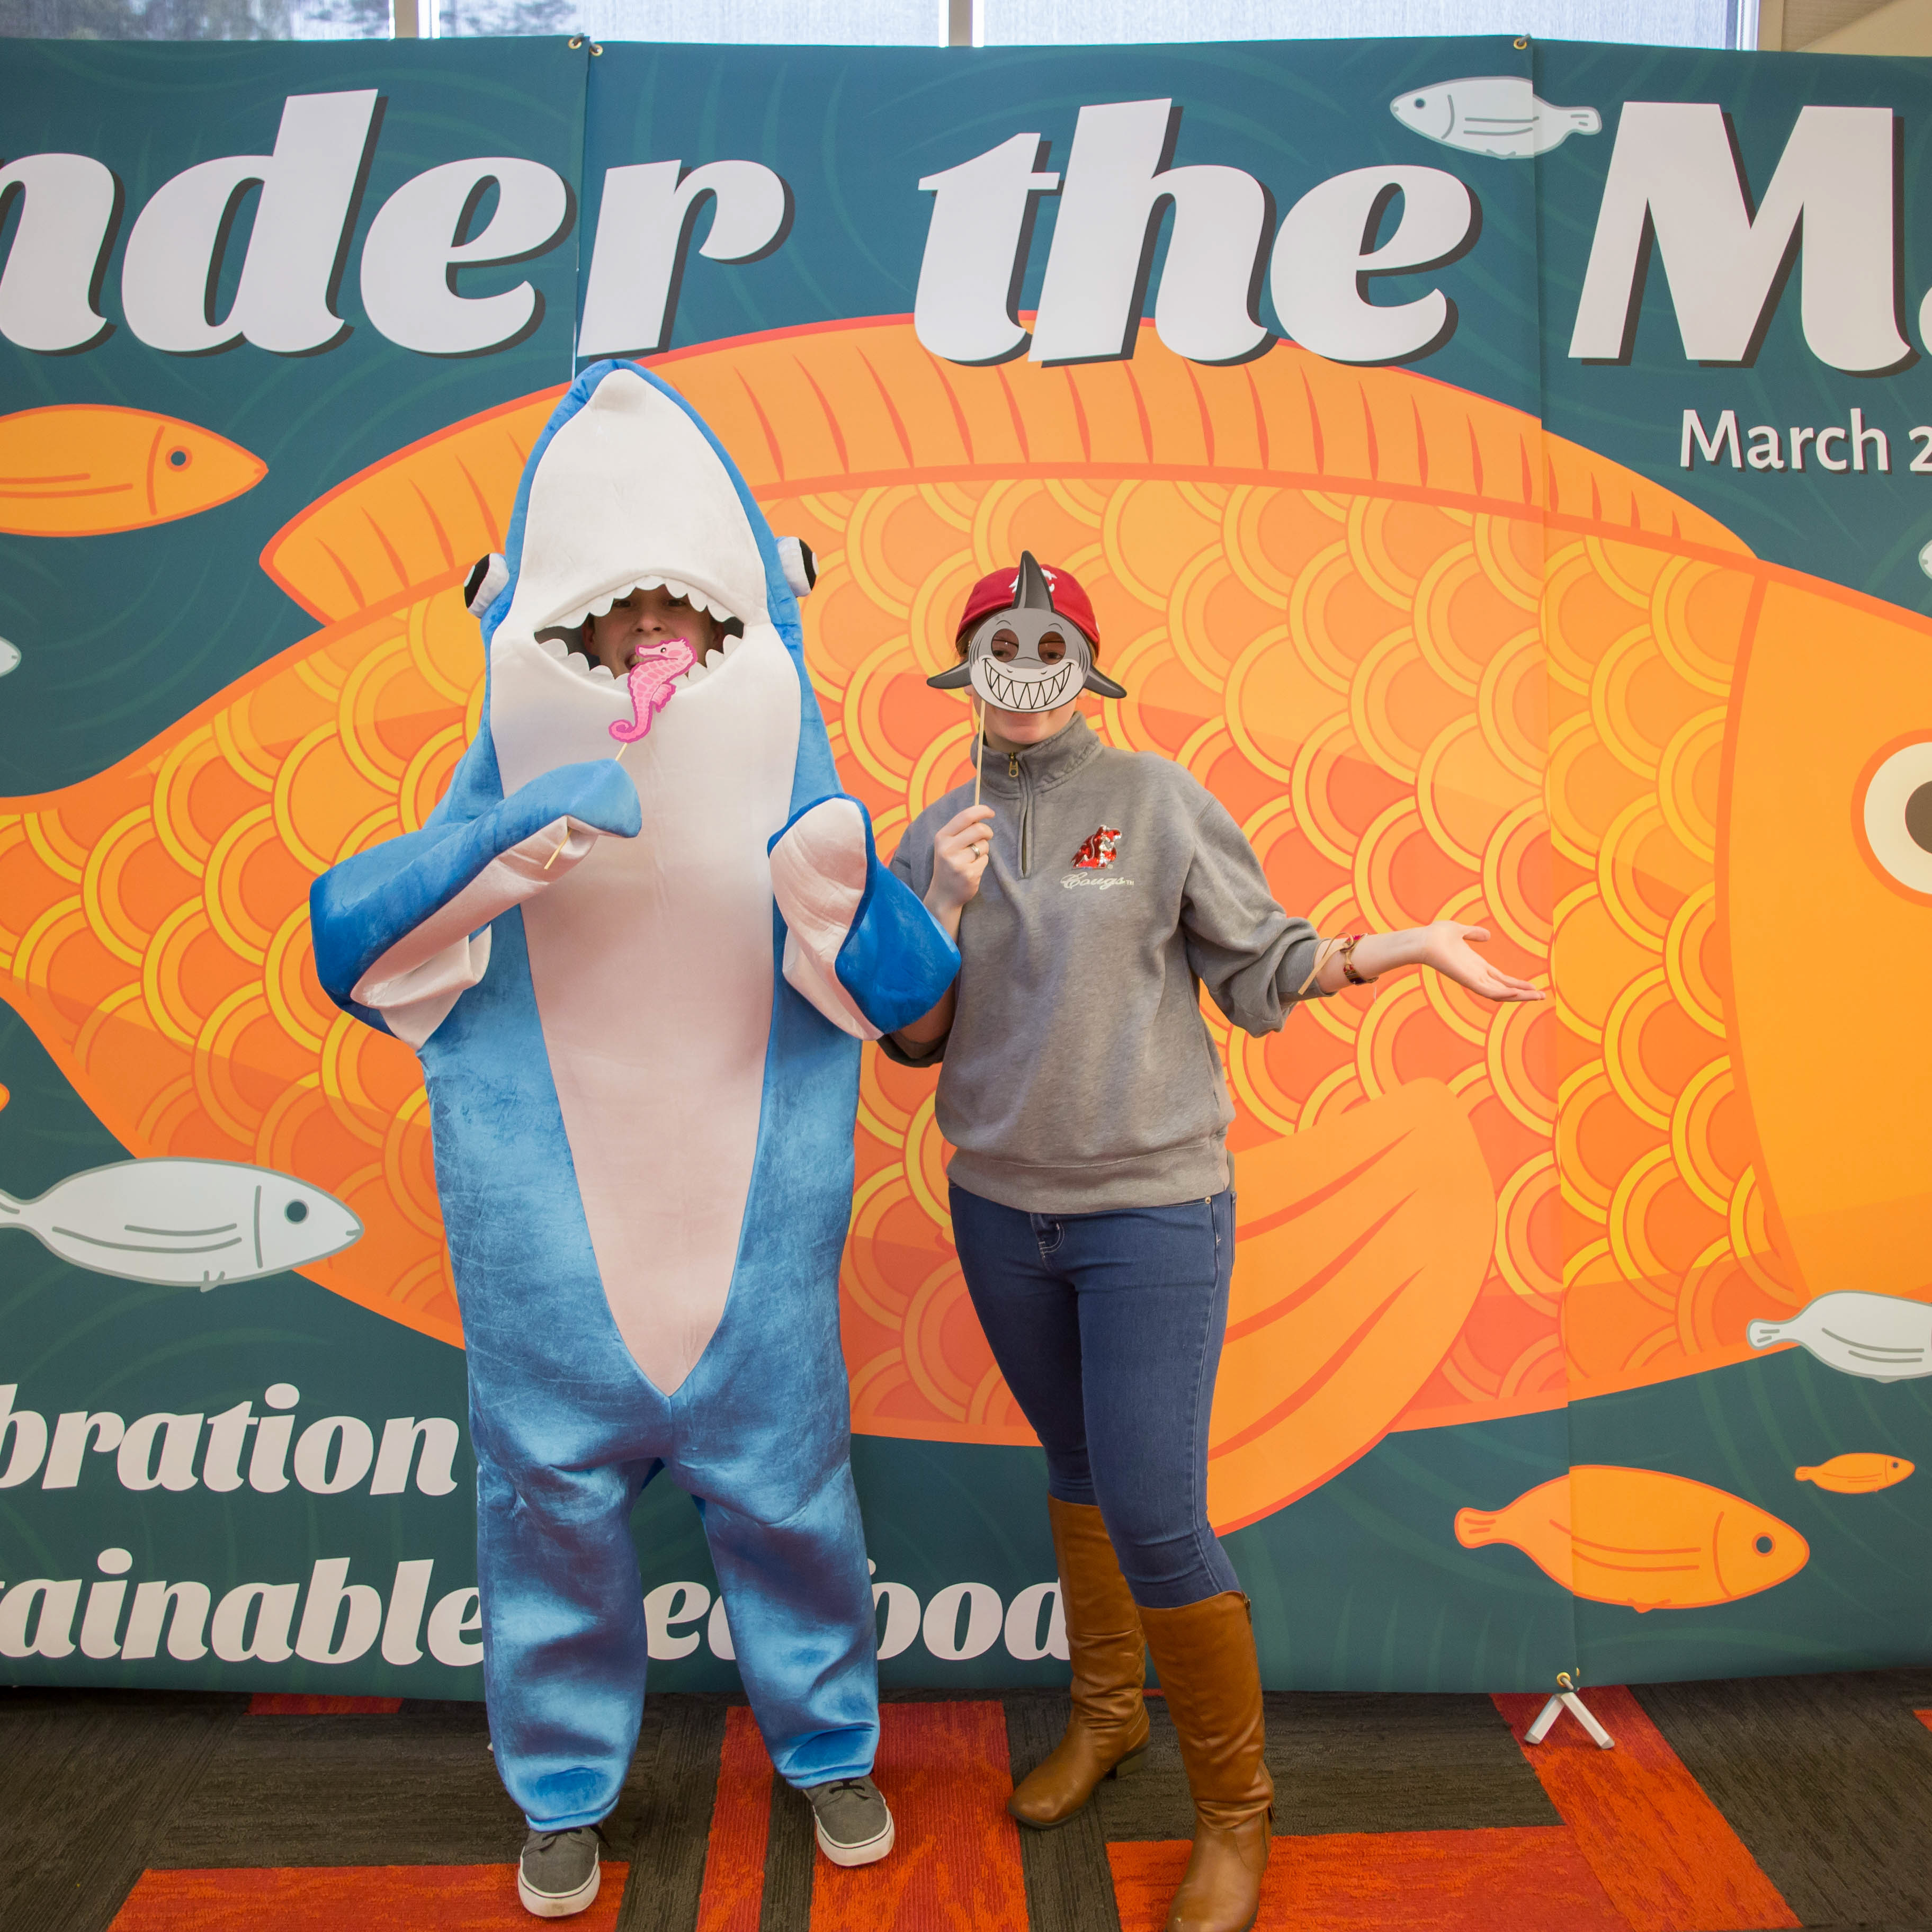 Dining employee dressed up as shark next to other employee for MSC event.